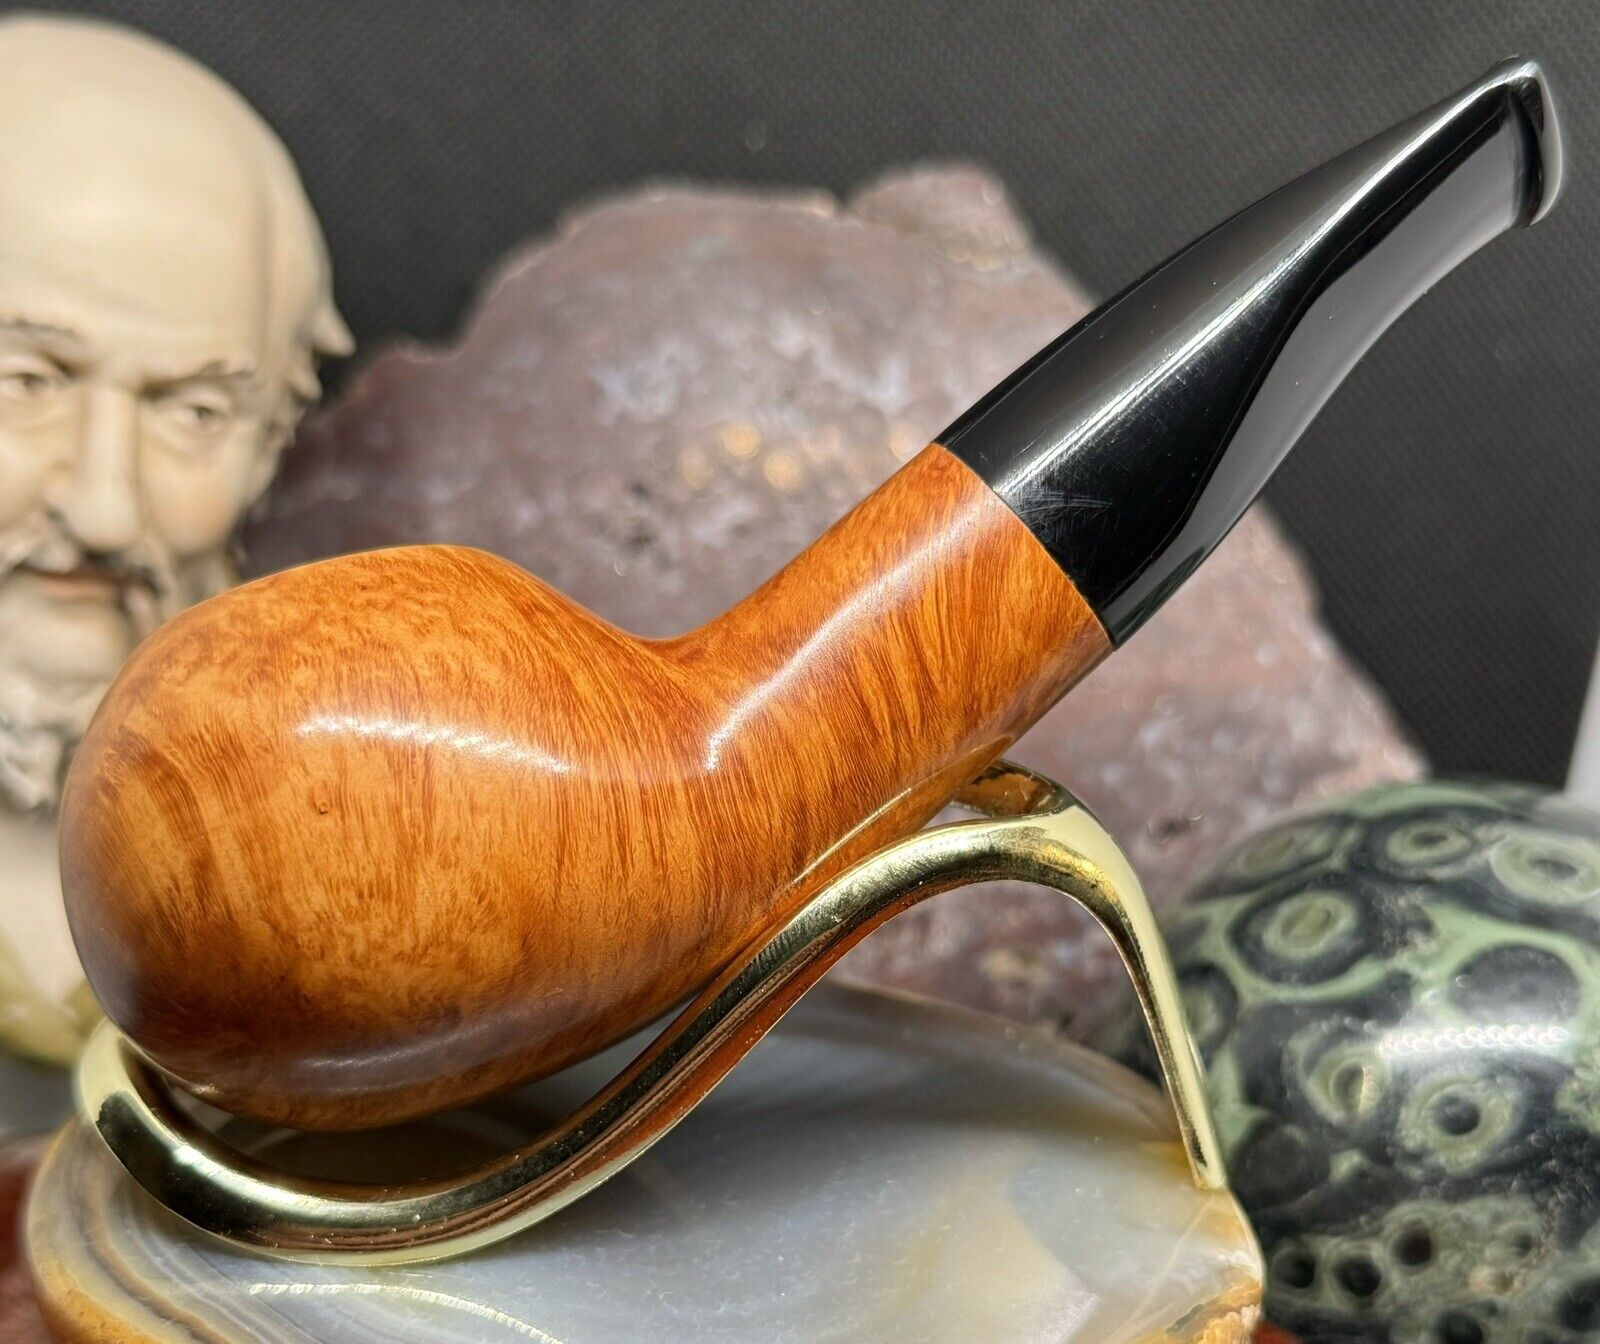 •Unsmoked• NEW Chubby TOMATO Handmade Fine Briar Pipe By Manelli ENHANCED Italy